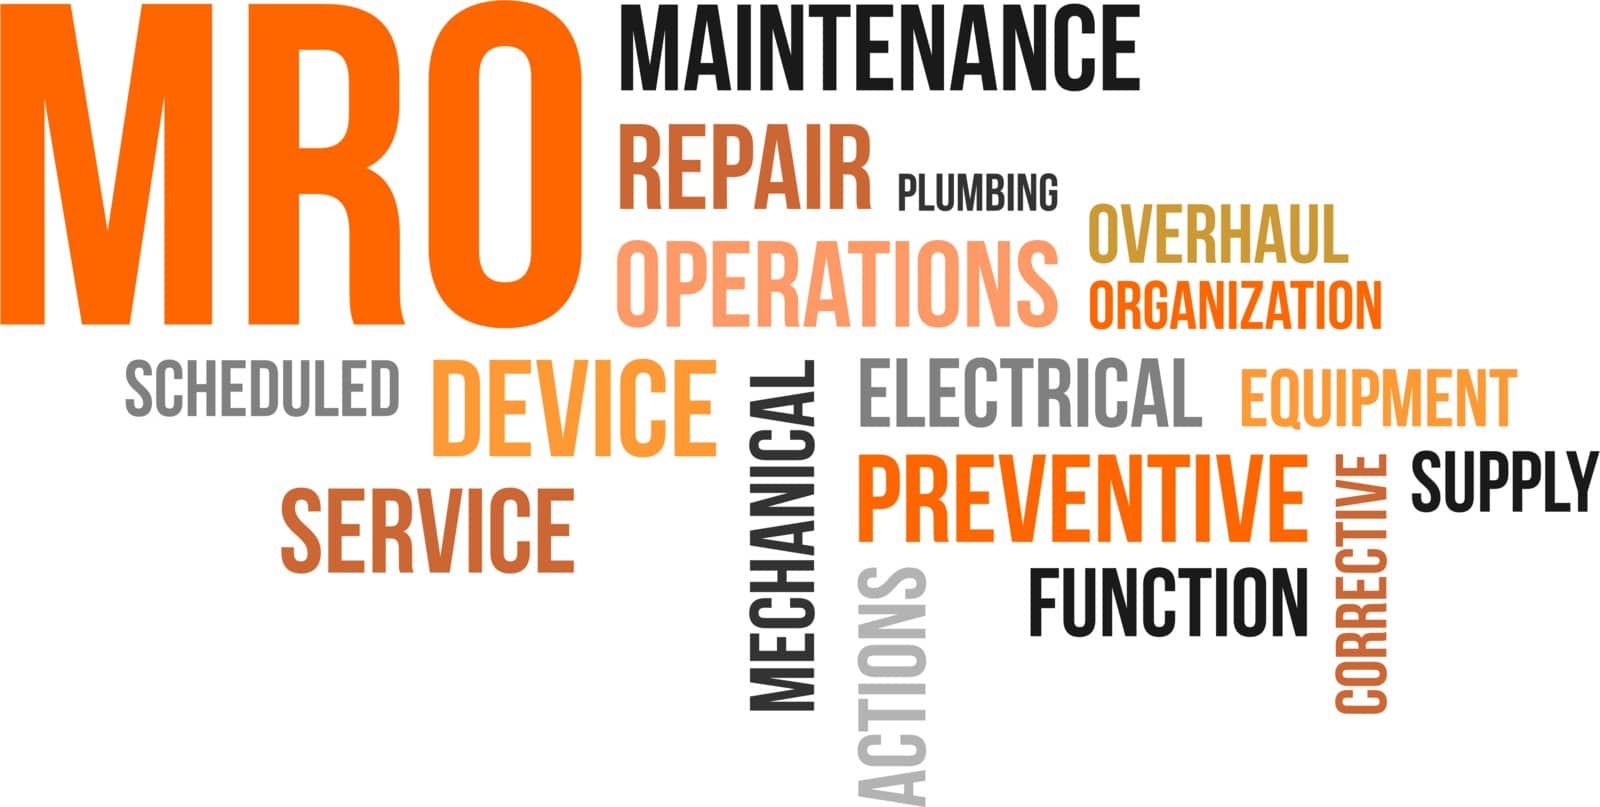 A word cloud of maintenance, repair and operations related items